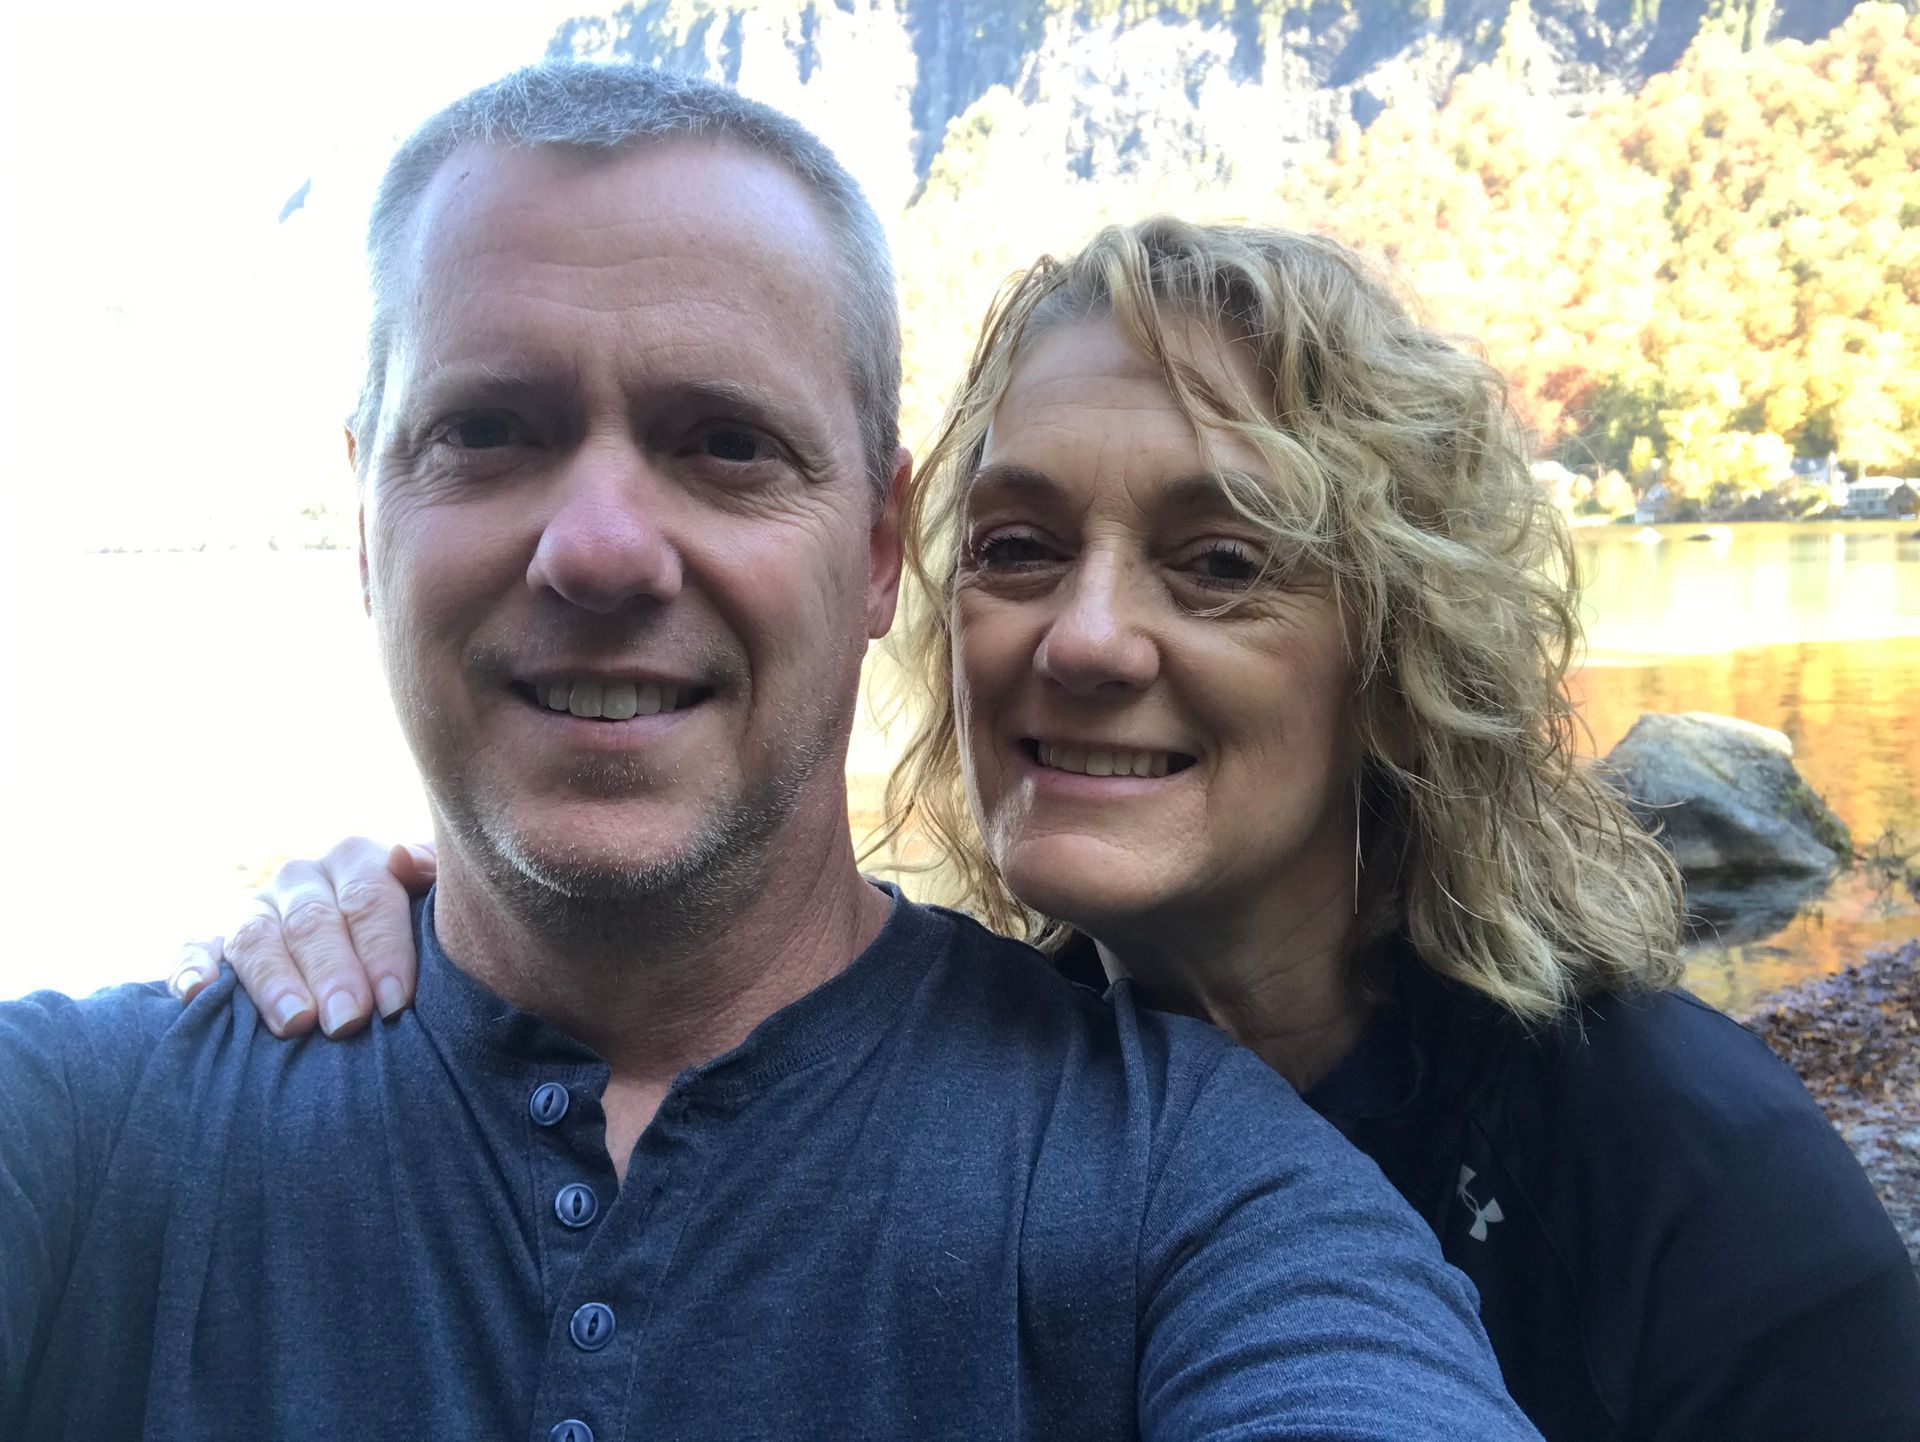 A selfie shot of two people with Mount Pisgah in the background.